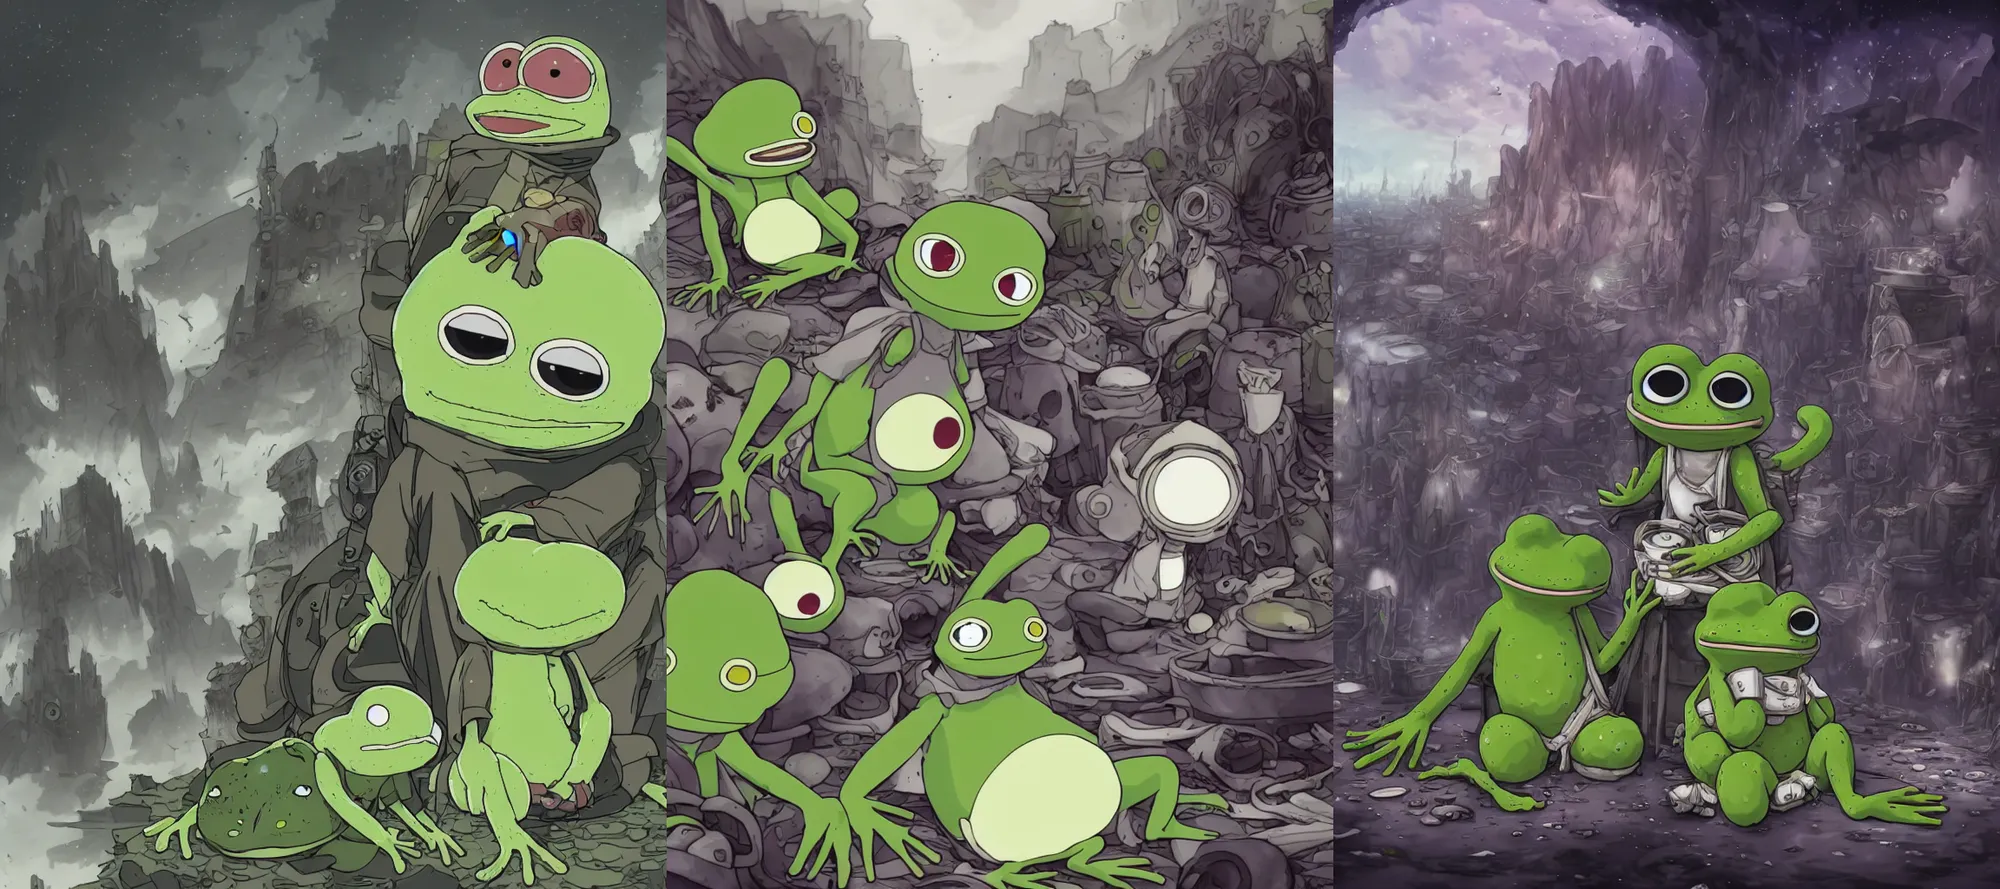 Prompt: resolution 4k worlds of loss and depression made in abyss design Akihito Tsukushi design body pepe the frog multiple figures war , battlefield darkness military drummer boy pepe , desolated city group of them a bloody conflict body horror curse of the abyss sitting by an ocean of blood the group of pepes sitting at the shore ivory dream like storybooks, fractals , pepe the frogs at war, art in the style of and Oleg Vdovenko and Akihito Tsukushi ,Stefan Koidl